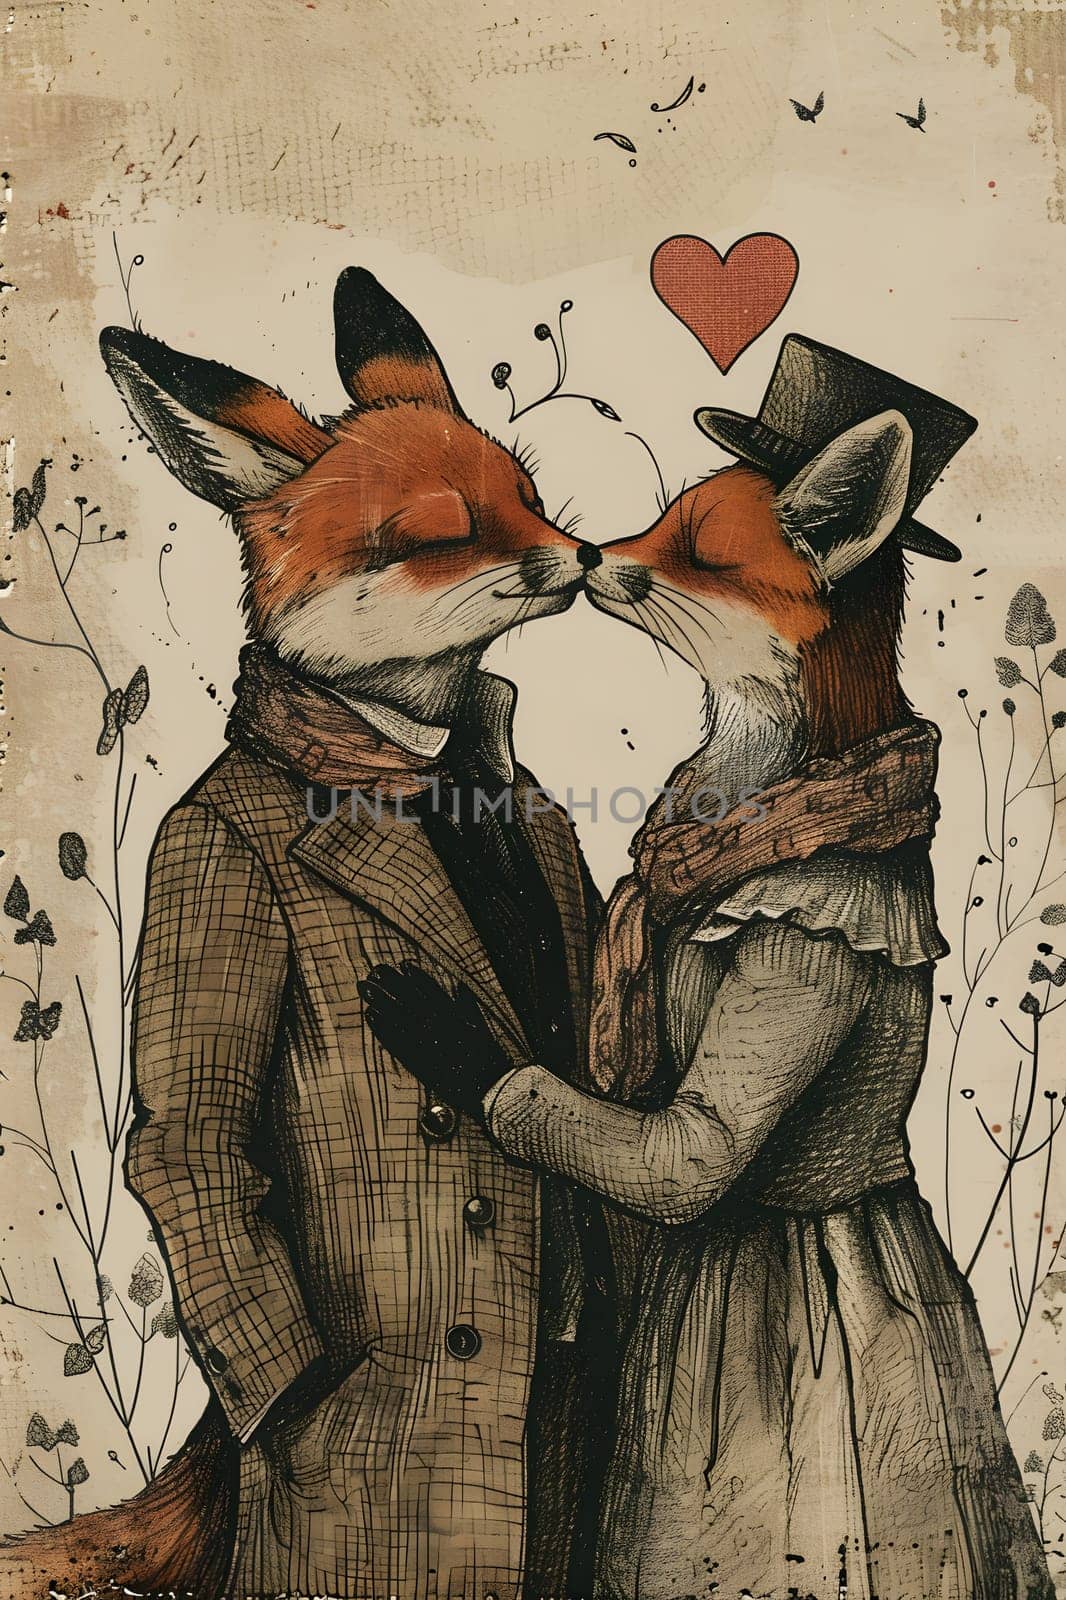 A creative arts painting of two fictional foxes kissing under a heart, showcasing the artists illustration and drawing skills in visual arts